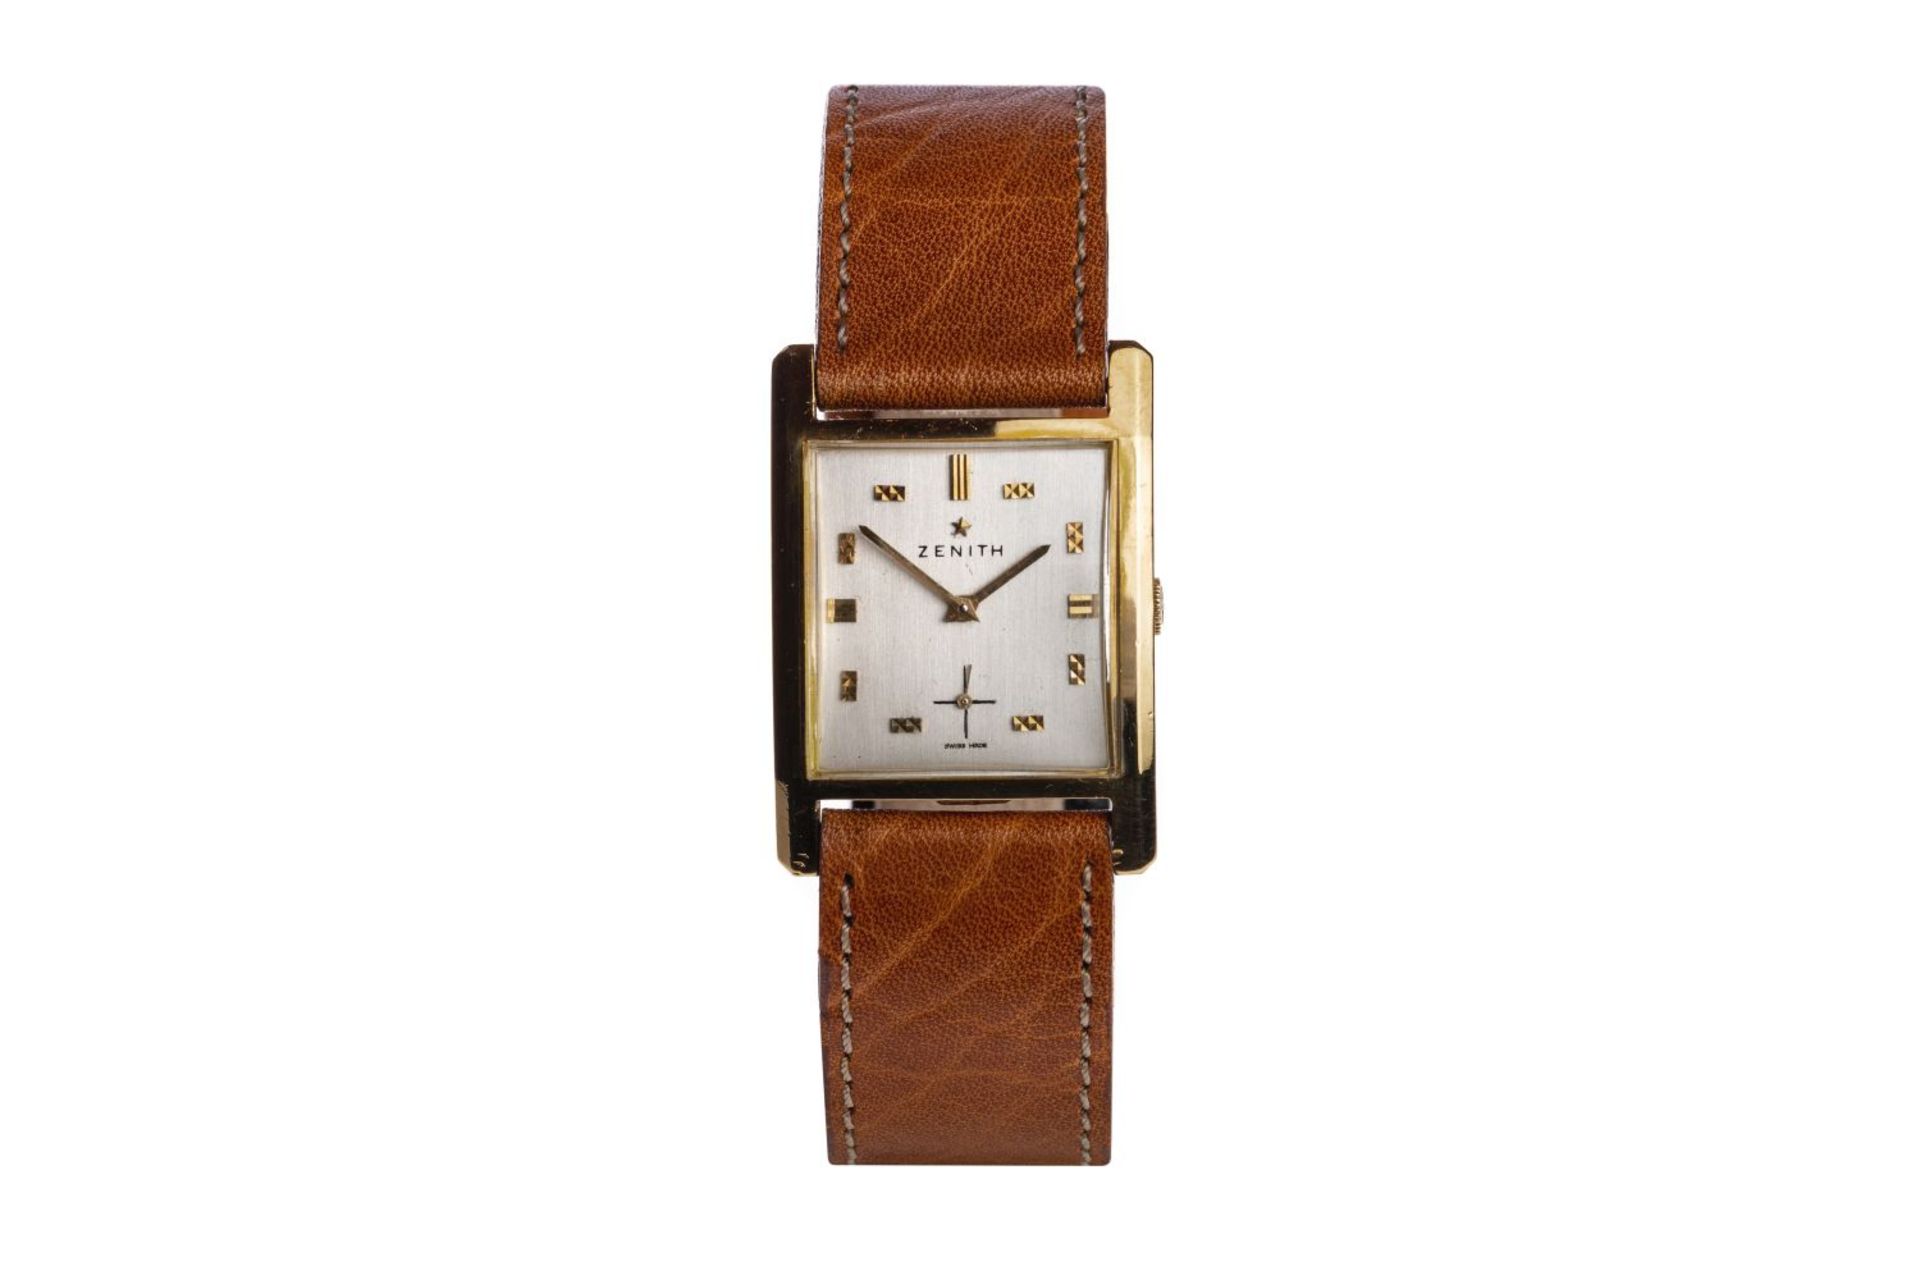 Zenith Vintage18kt gold watch on leather strap 37x26mm, manual wind construction year 1940 -